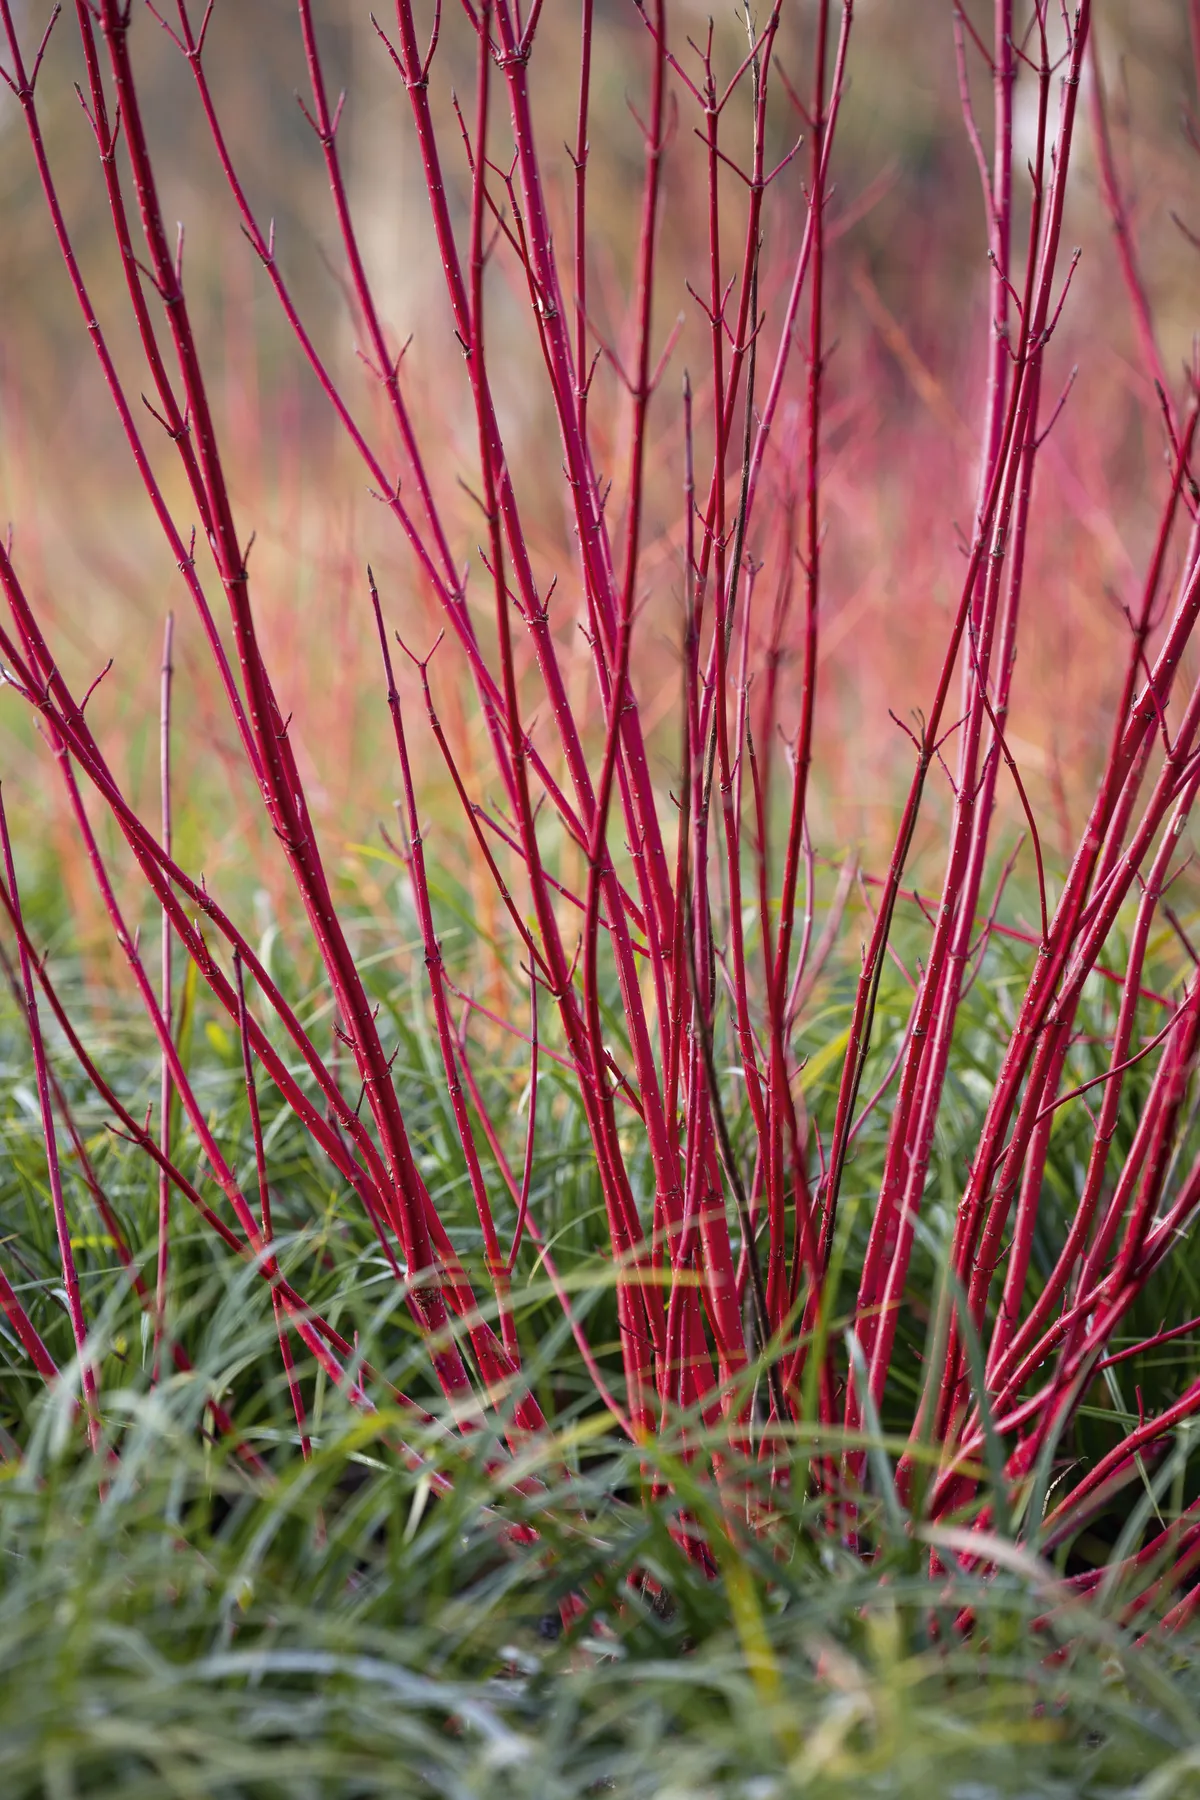 Cornus alba ‘Sibirica’ 6 Cornus alba ‘Sibirica’ A suckering, deciduous shrub forming a thicket of colourful red stems, becoming conspicuous A suckering, deciduous shrub forming a thicket of colourful red stems, becoming conspicuous after a colourful leaf fall in autumn. 2.5m x 2m. AGM*. RHS H7, USDA 3a-7b.